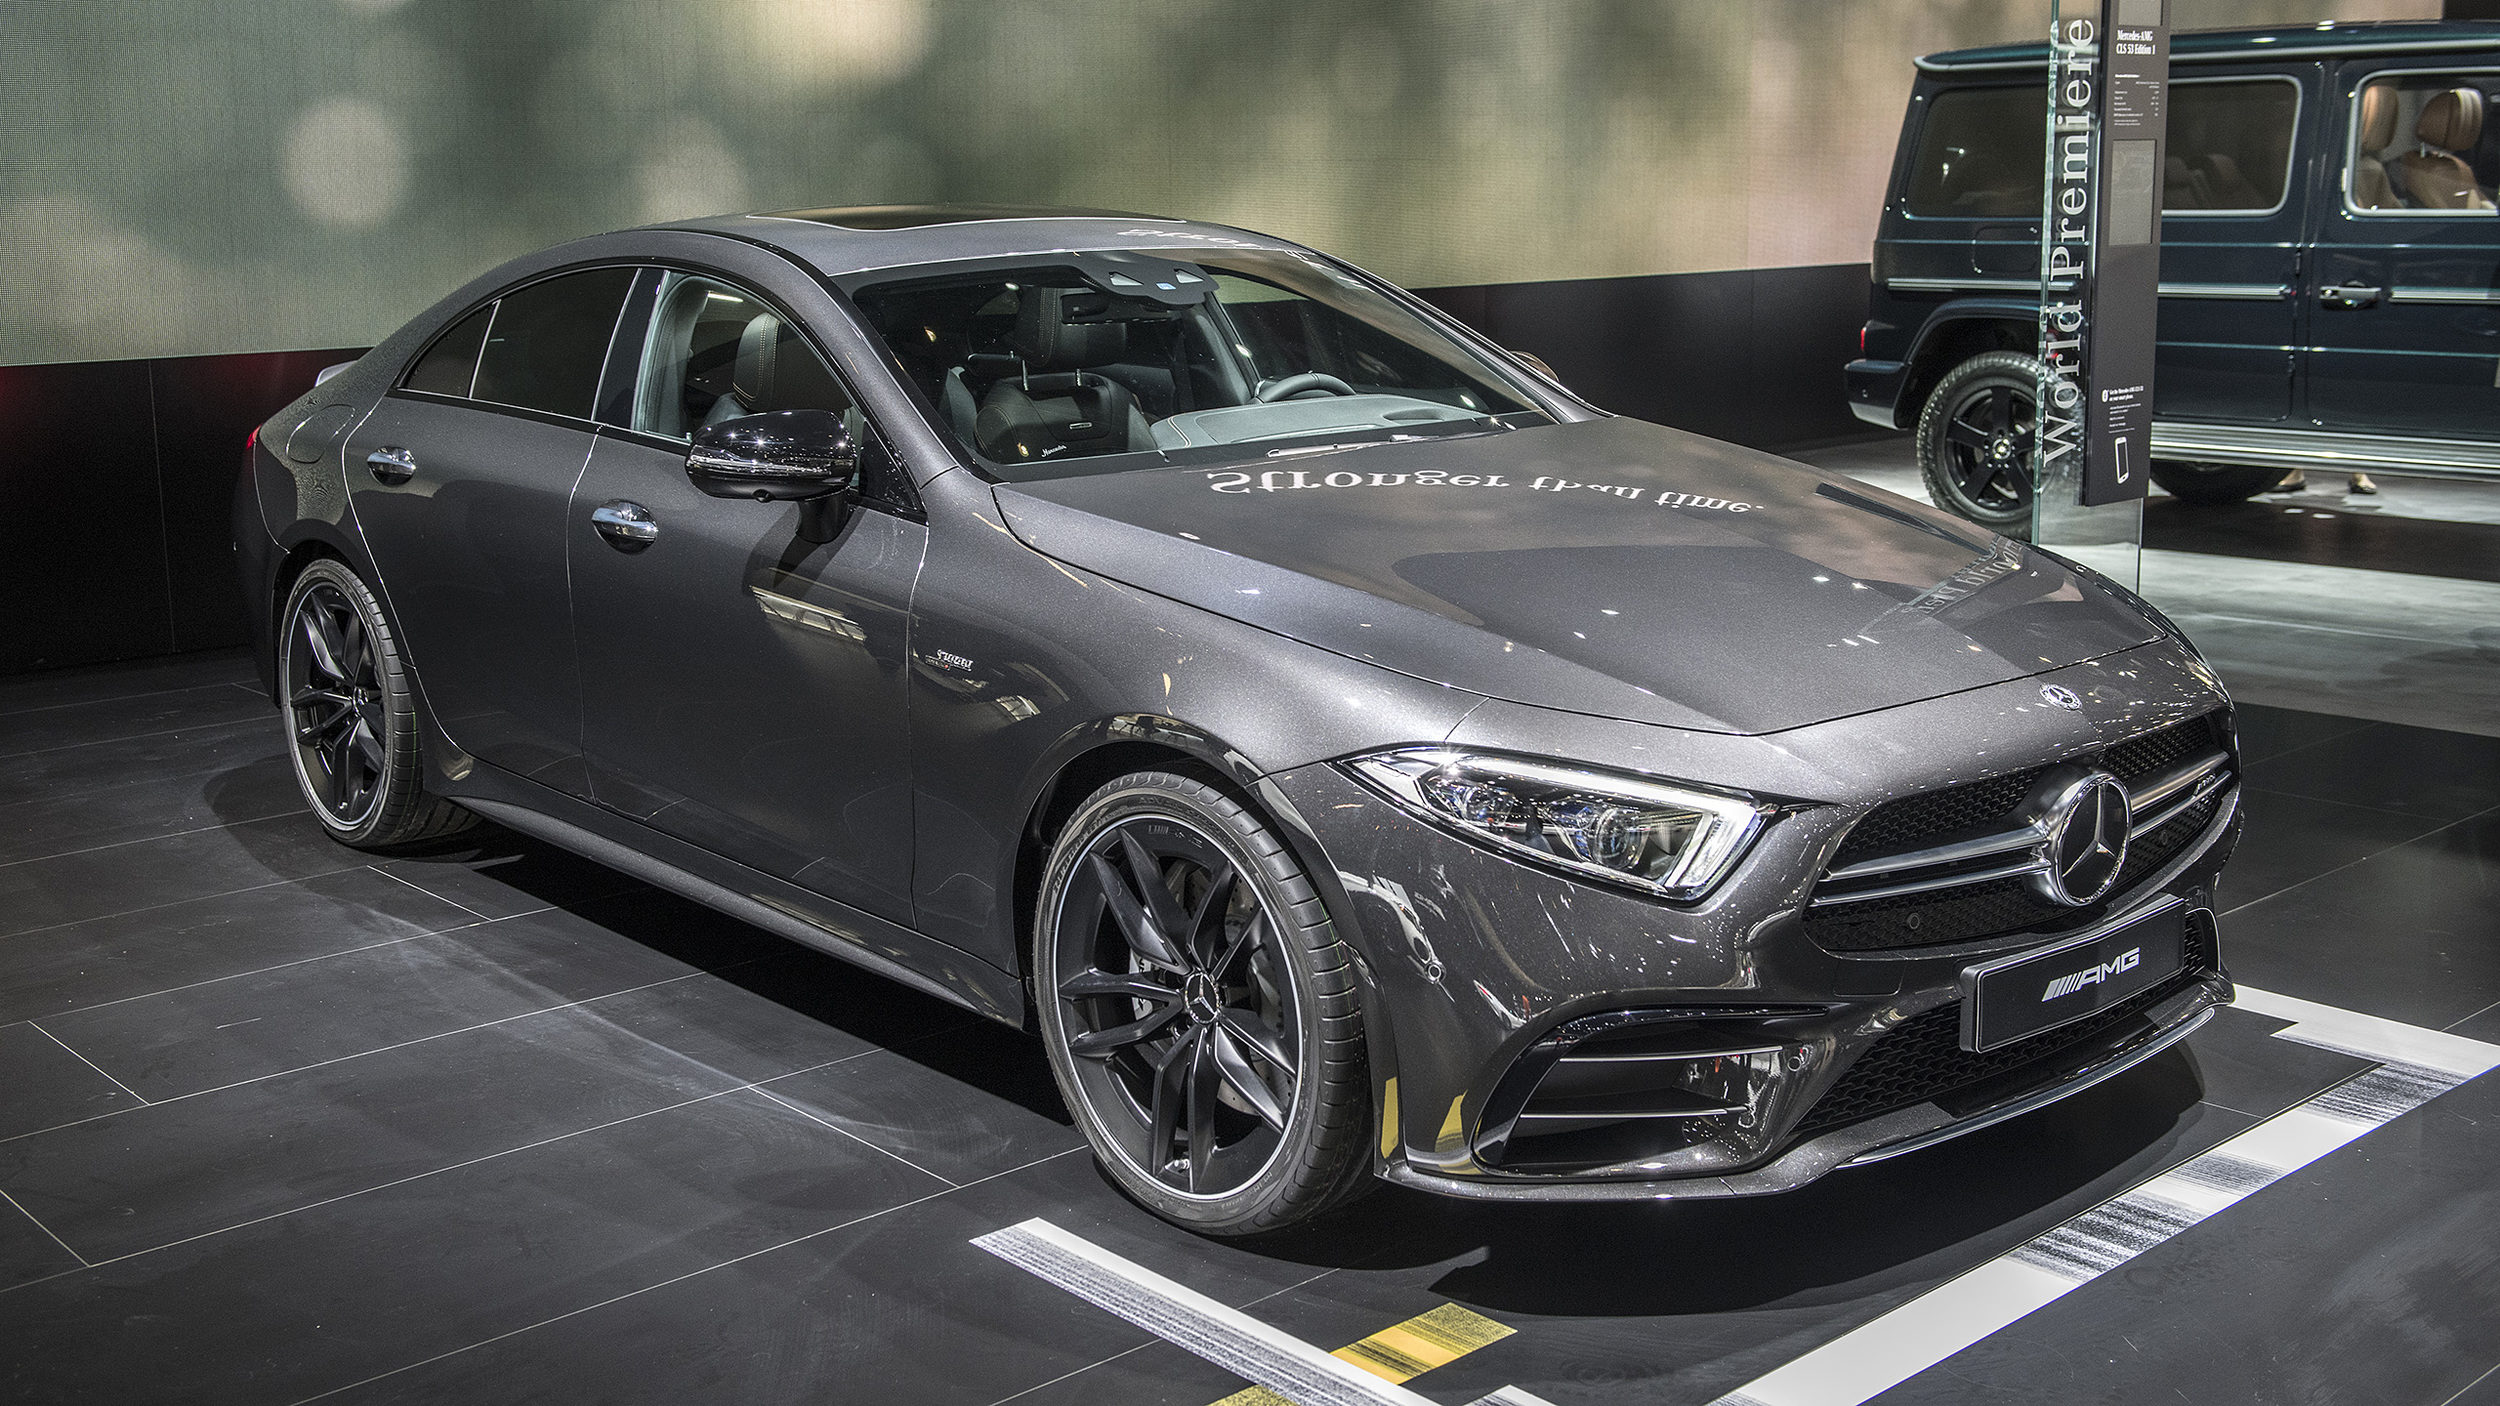 2019 Mercedes-AMG CLS53: Detroit 2018 Photo Gallery